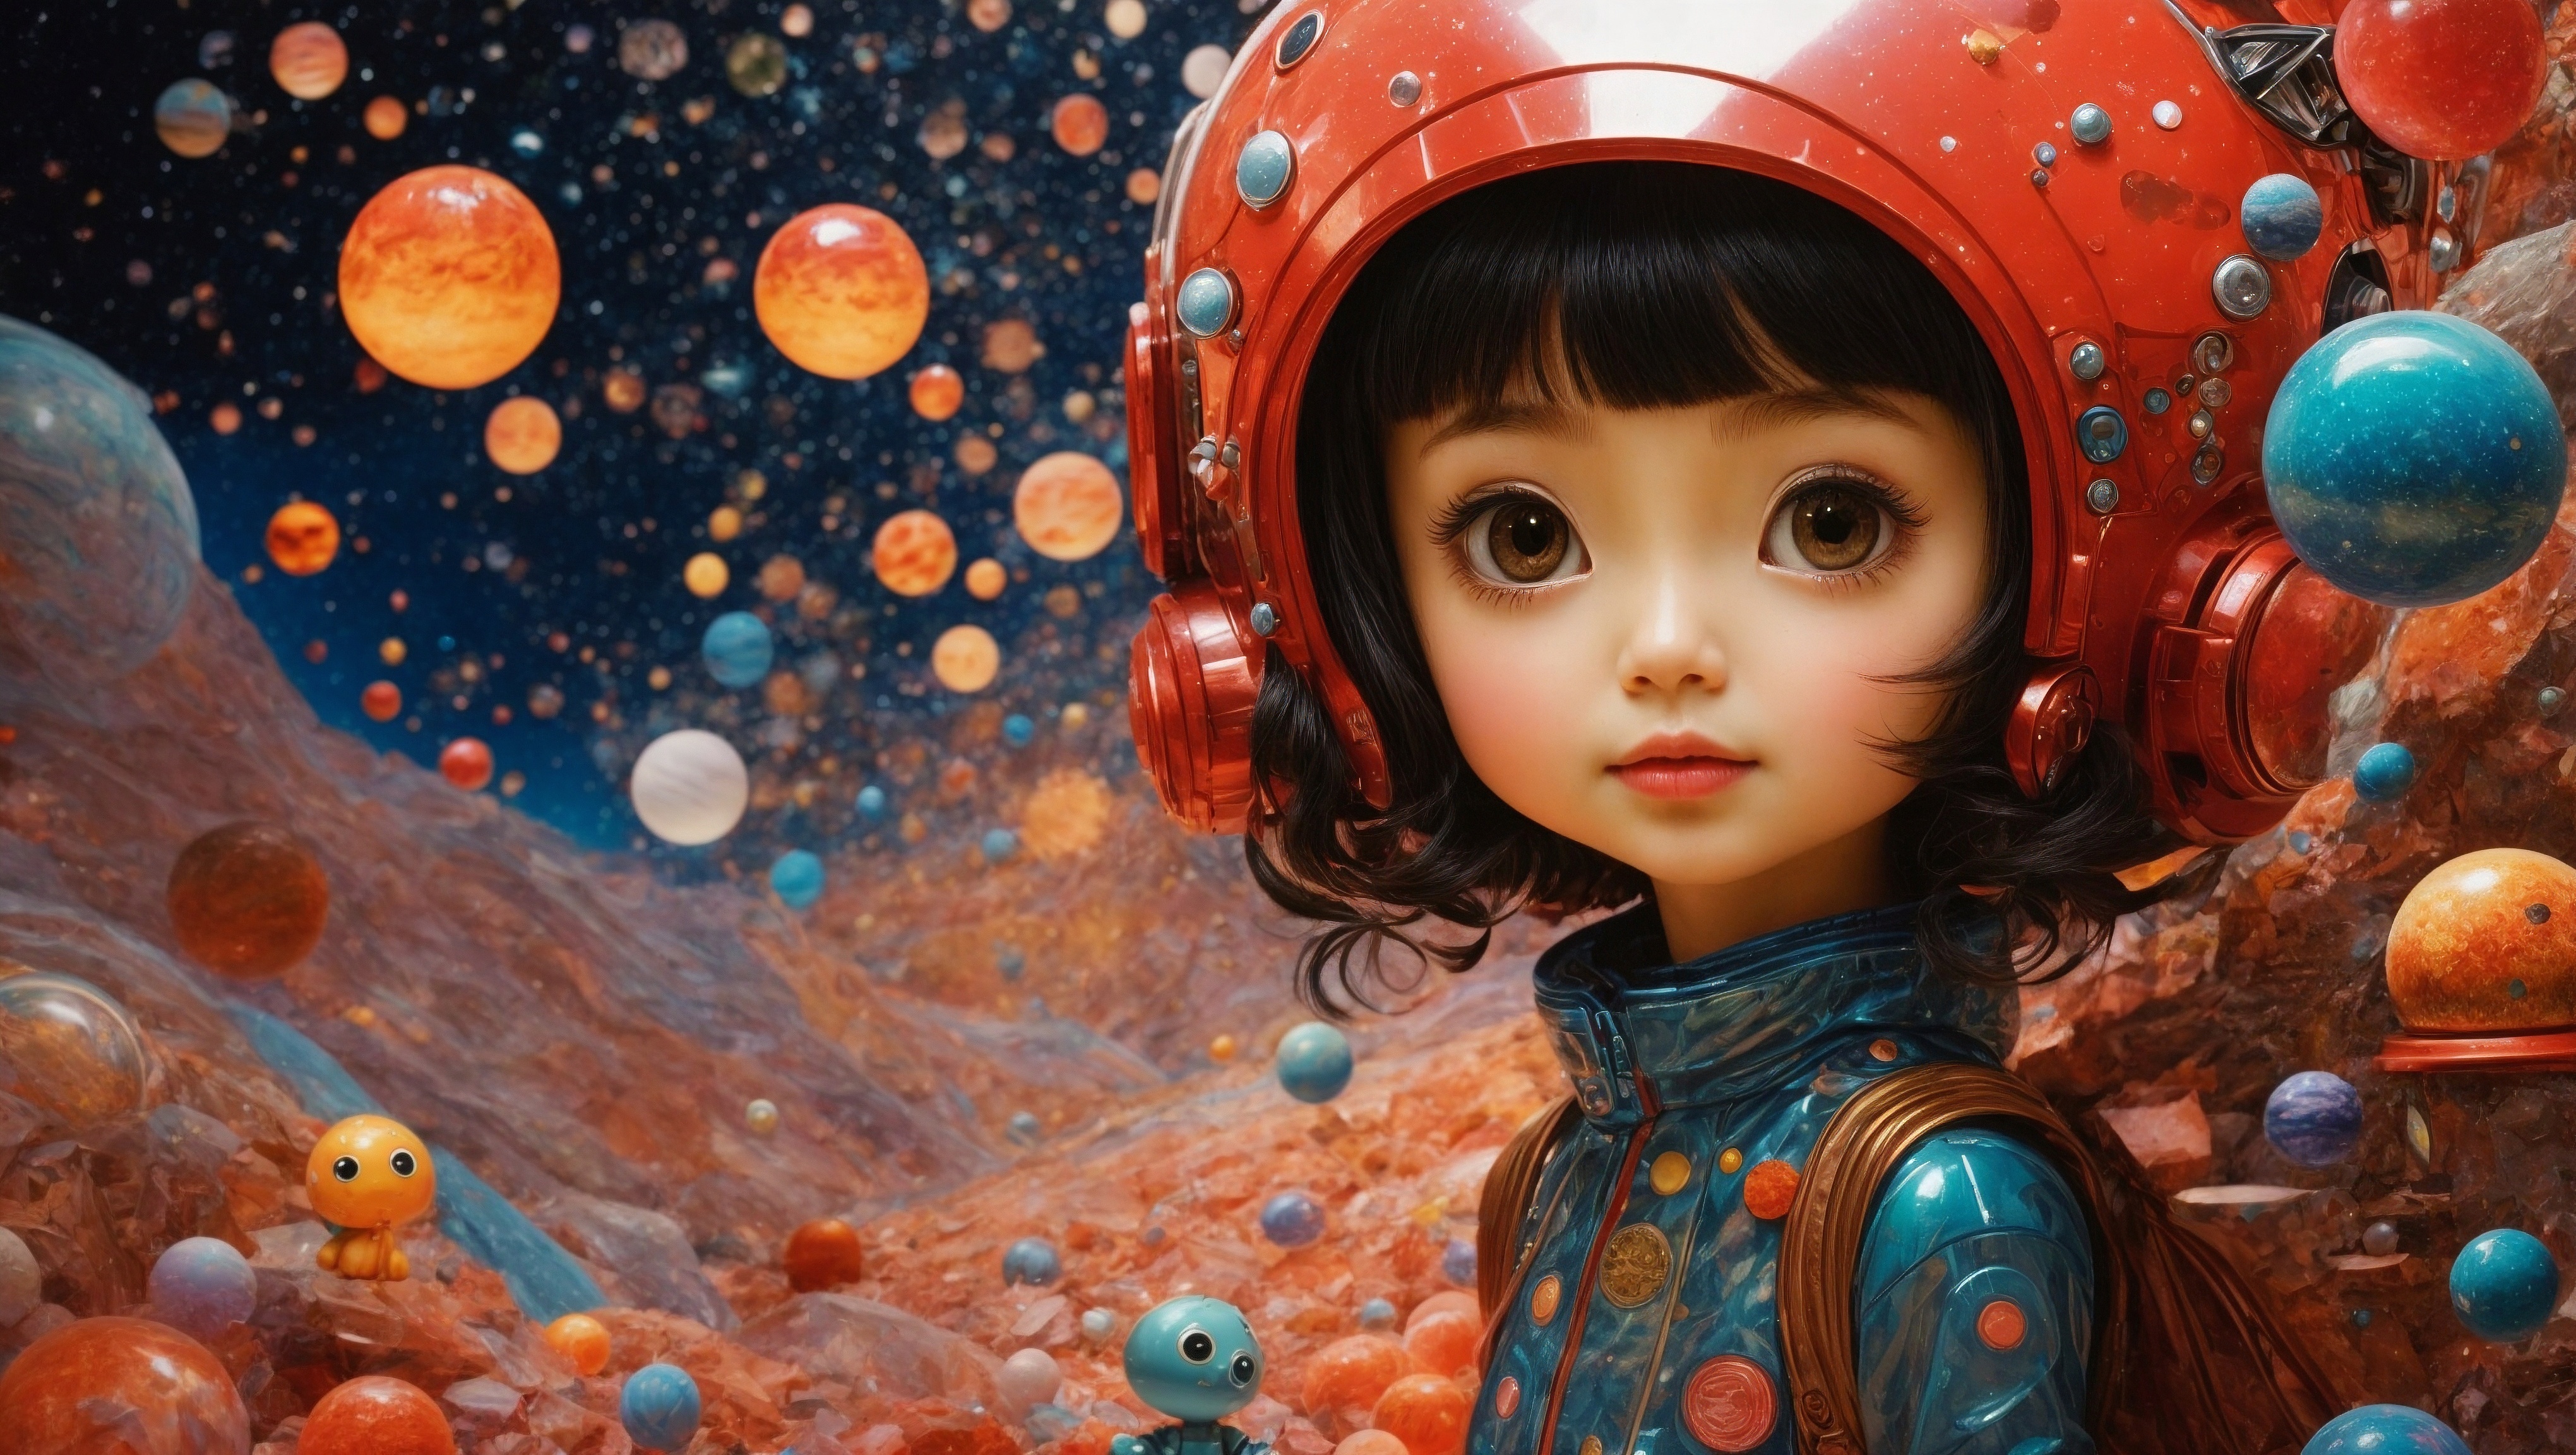 A young girl dressed as an alien in space with orange, blue and orange balloons